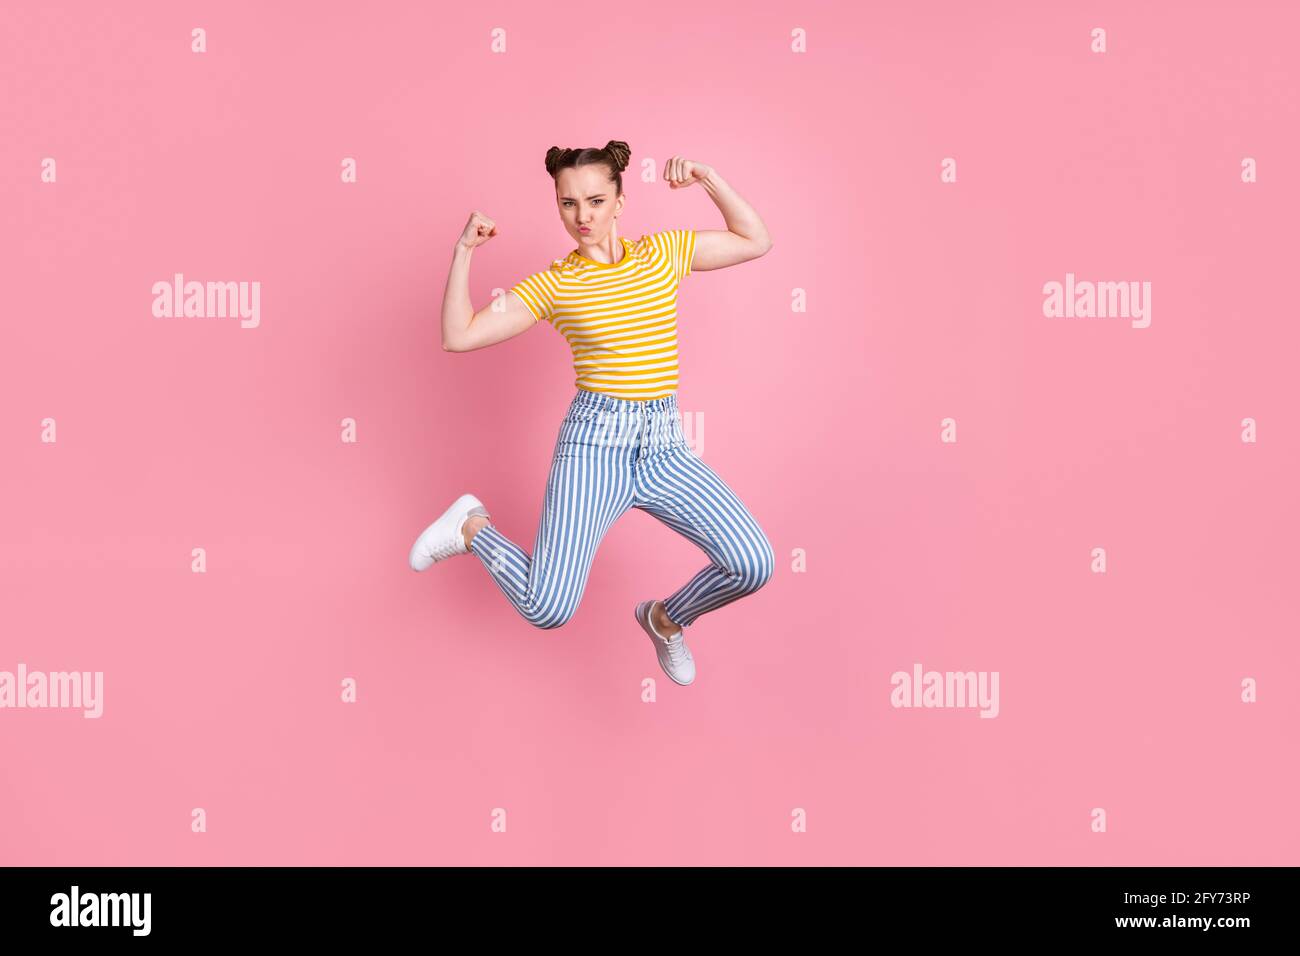 Full size portrait of energetic young person jumping flexing biceps isolated on pink color background Stock Photo